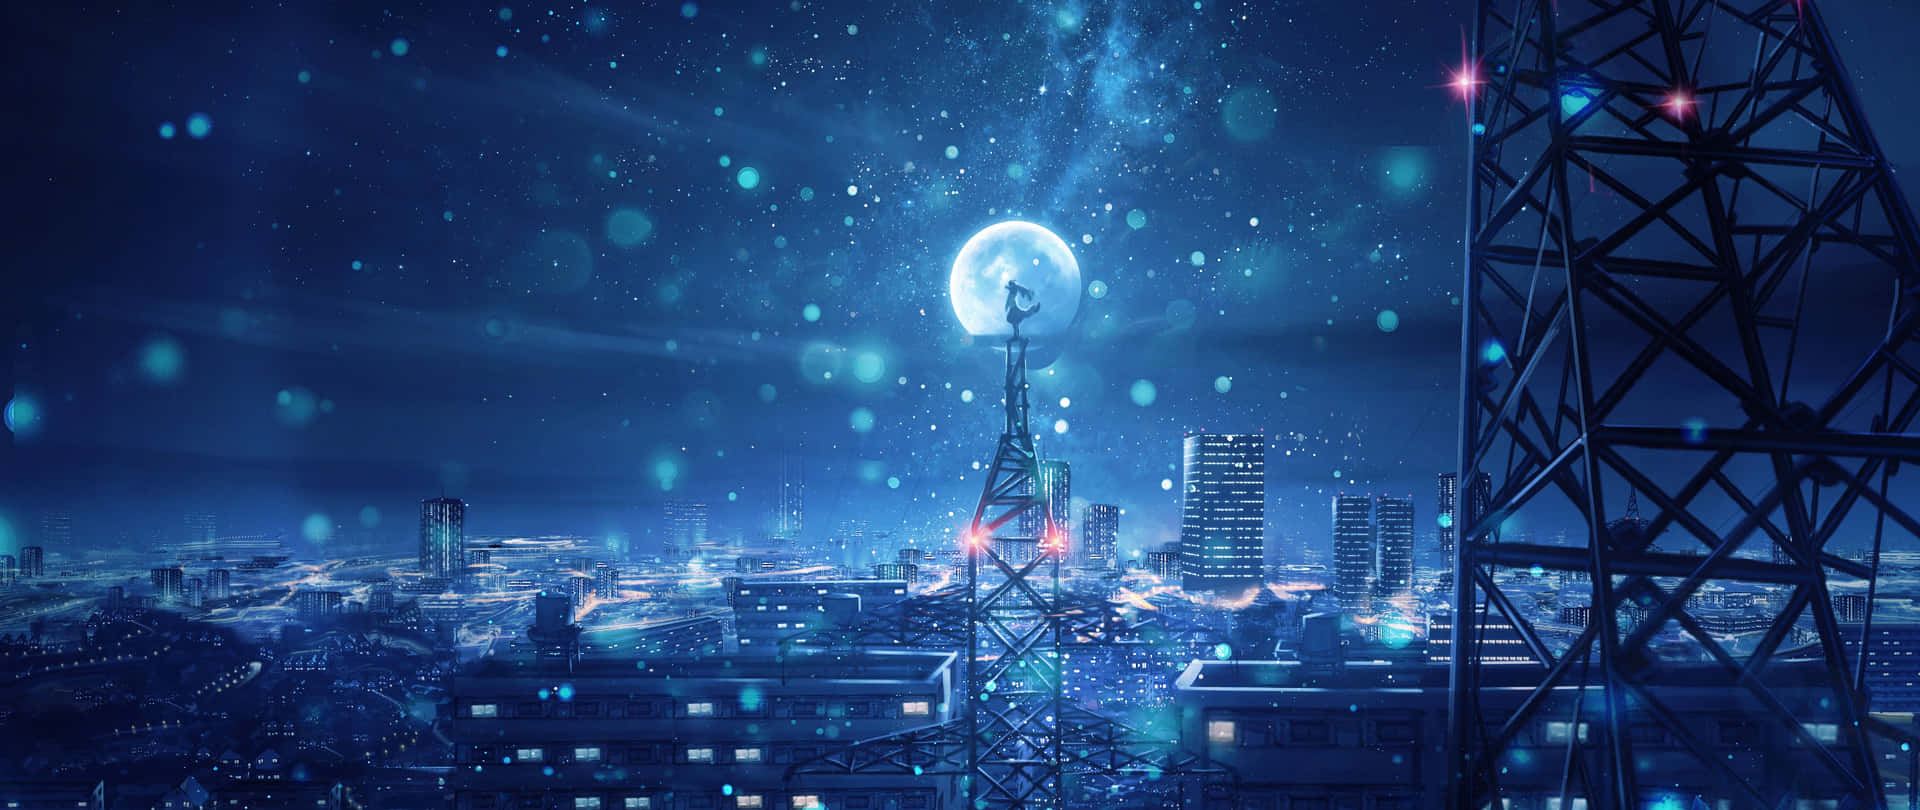 A City With A Radio Tower And A City With A Moon Background